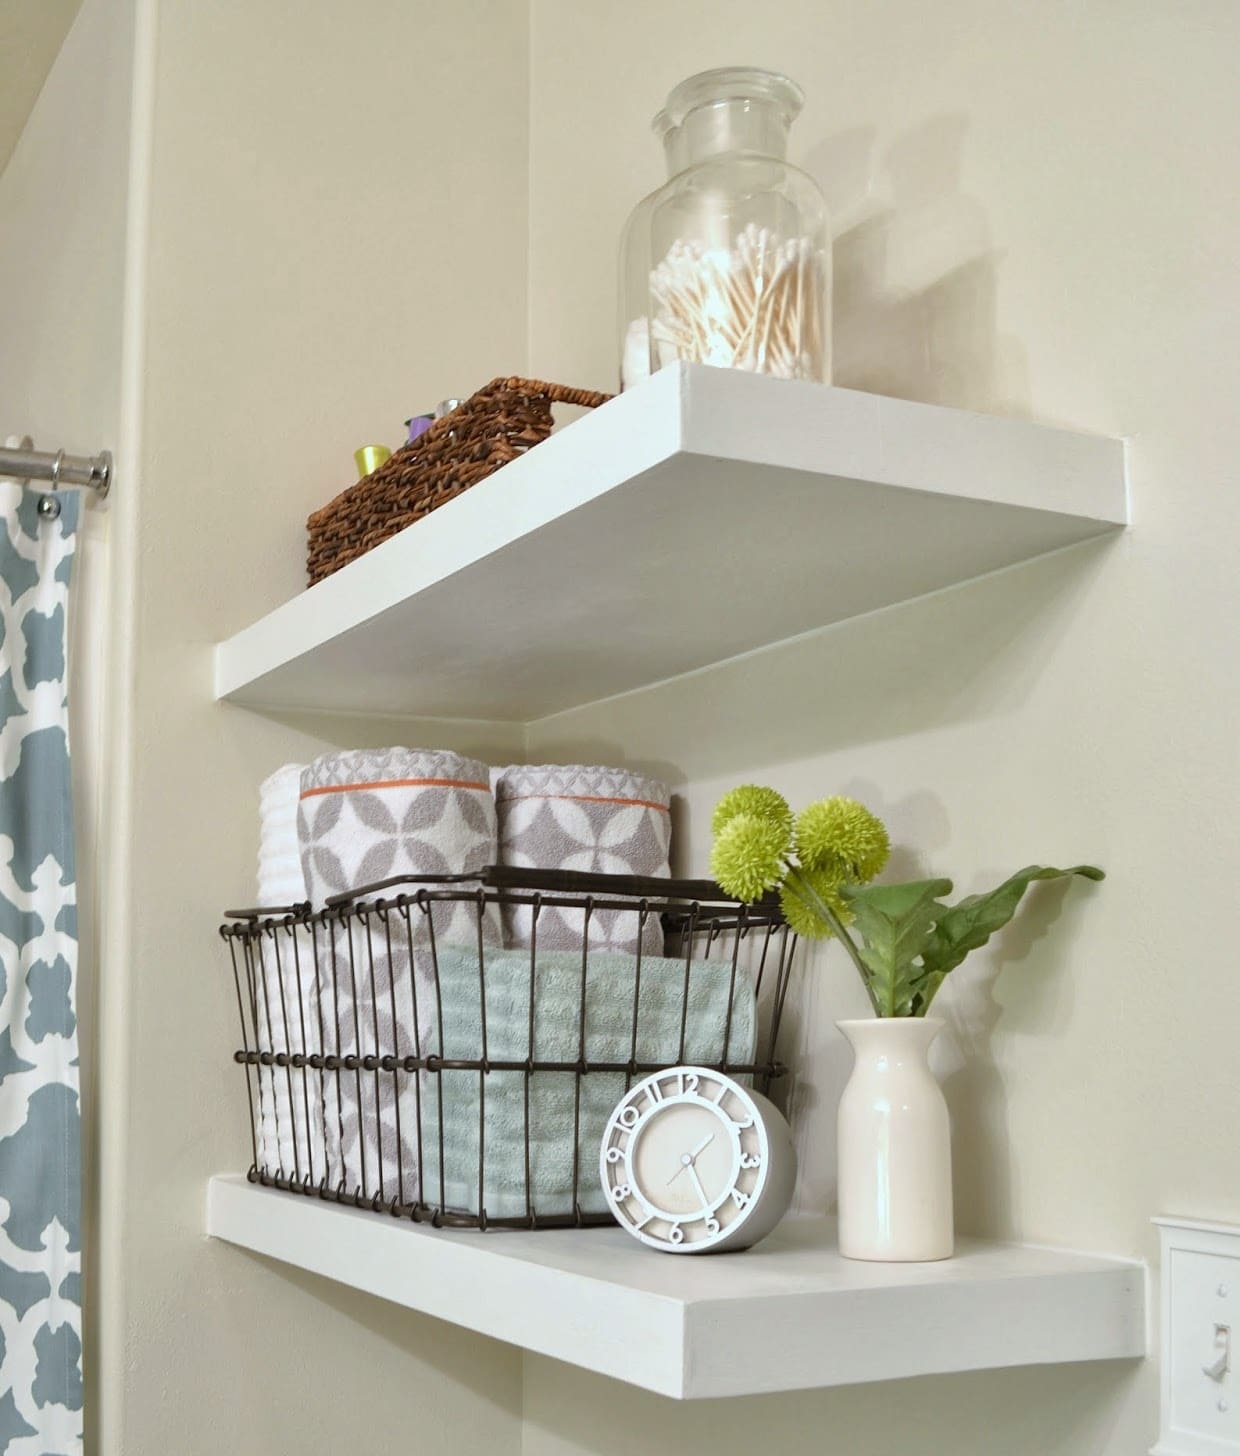 24 clever bathroom shelf ideas to save your space - 73